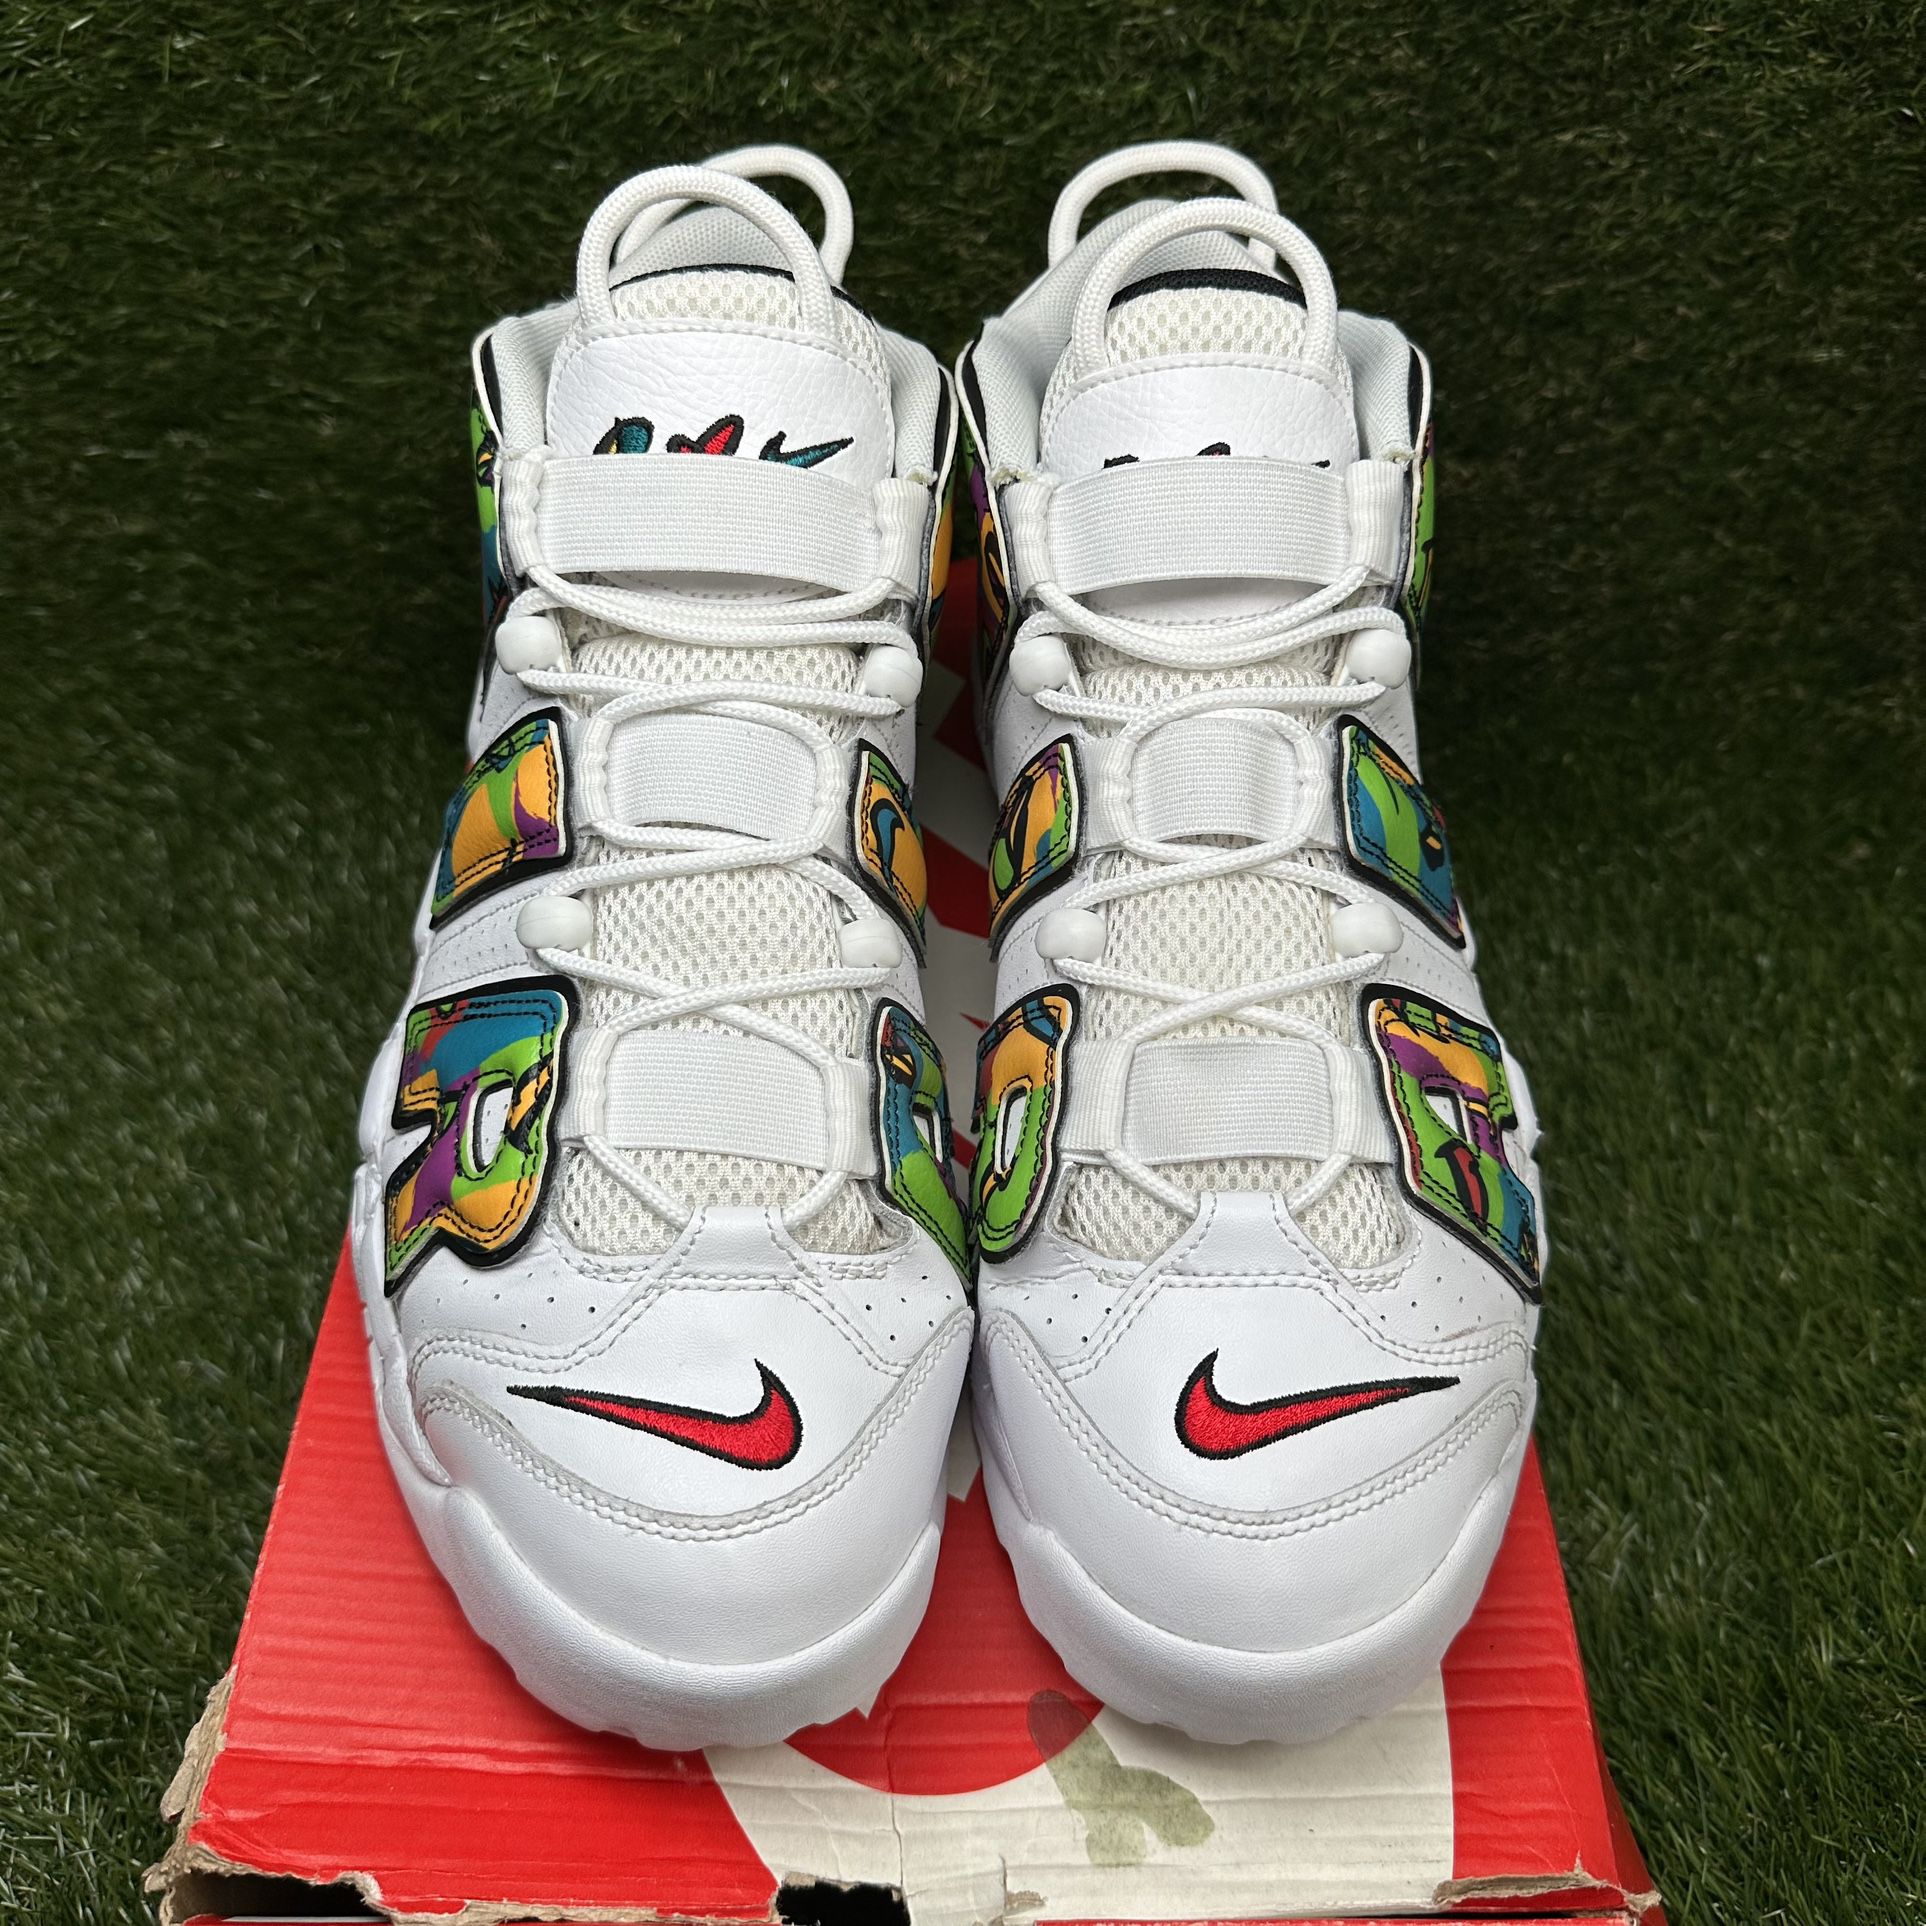 Nike Air More Uptempo Peace Love Basketball for Sale in